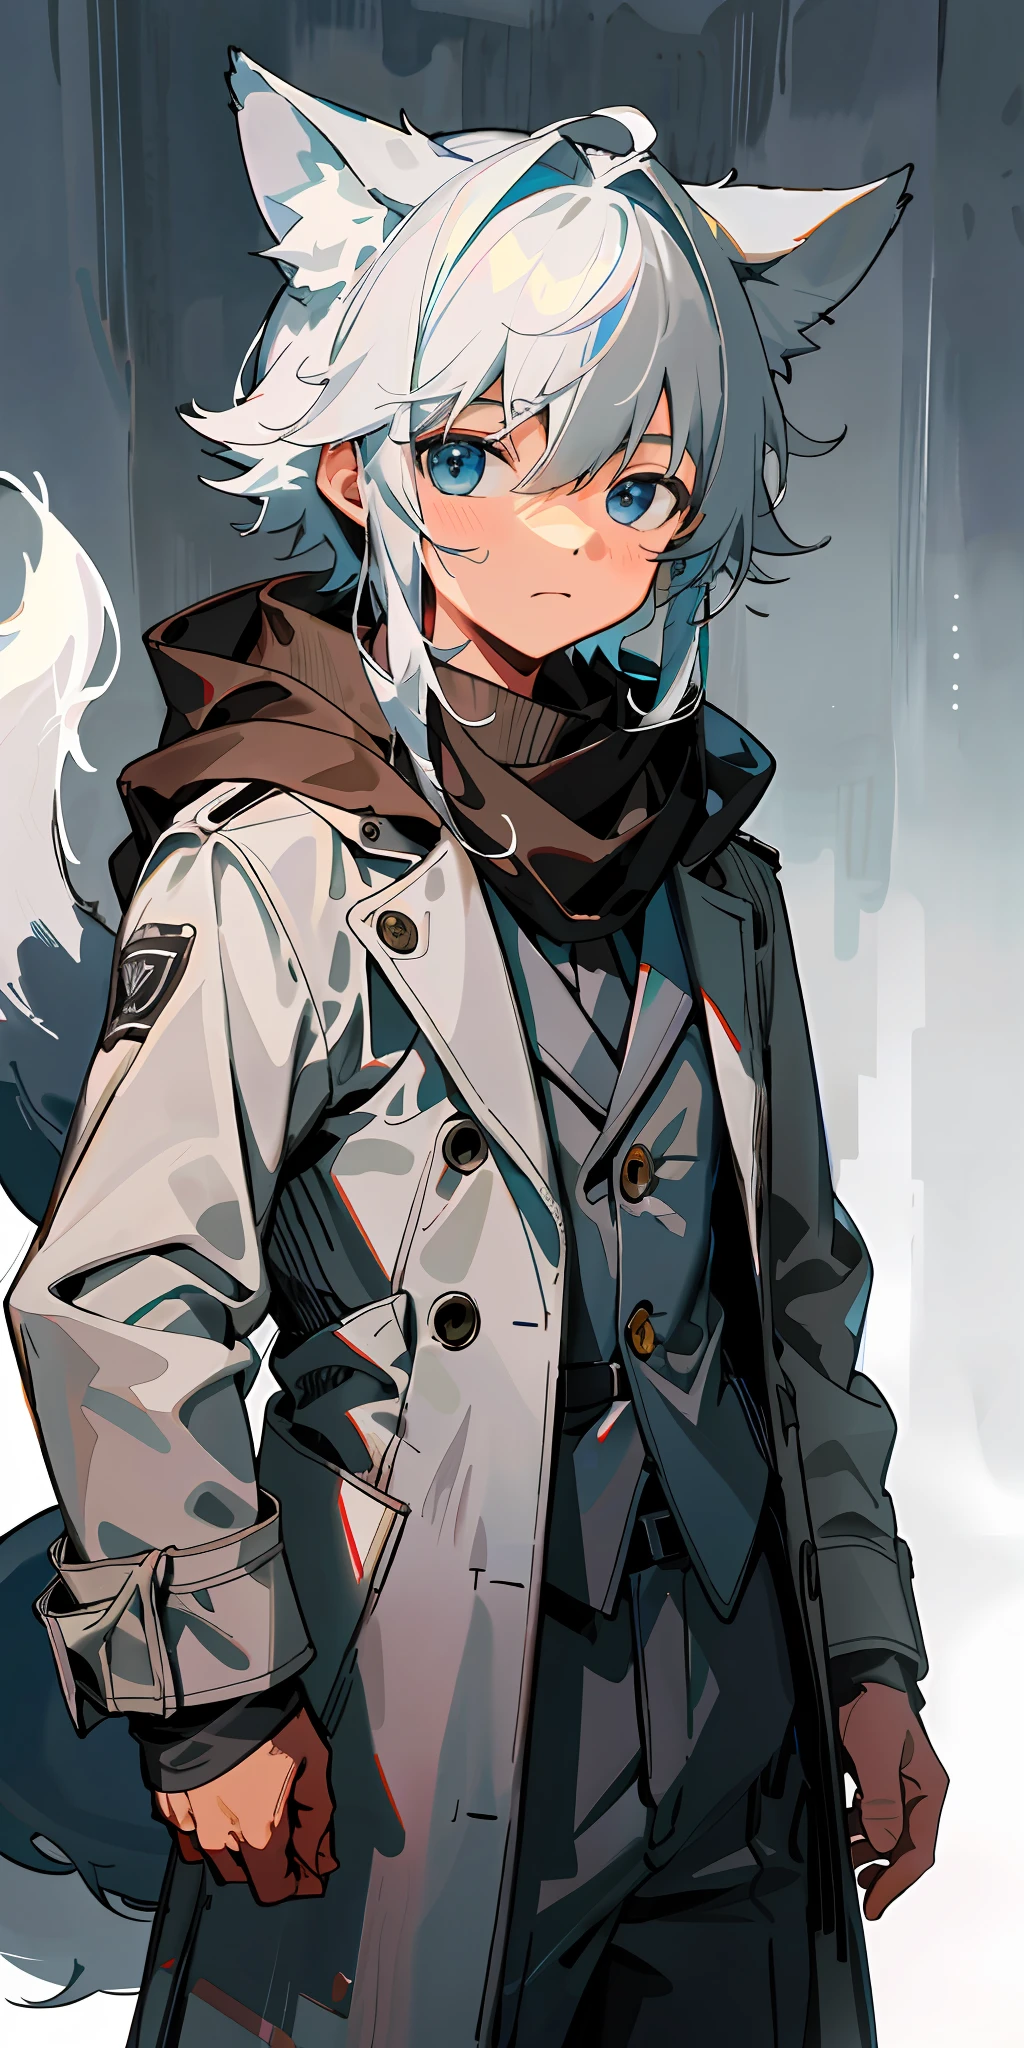 1boy, shota, (HD quality, masterpiece level), fresh and cold teenage characters, wolf ears and wolf tail highlight the character's sense of belonging, blue eyes and dark gray hair echo each other, the clean lines of the white-gray military trench coat show the character's modesty and confidence, brown scarf and black boots are rigid and soft, as if ready to go. The whole picture is simple and atmospheric, and the high and cold temperament is respectful. No background, white screen, slightly toned, HD, masterpiece, white background, dark gray hair, blue eyes, (wolf ears), (wolf tail), slim white-gray military trench coat, no hood, brown scarf, black boots, one tail, little boy, covering ears, hair covering ears, face to camera